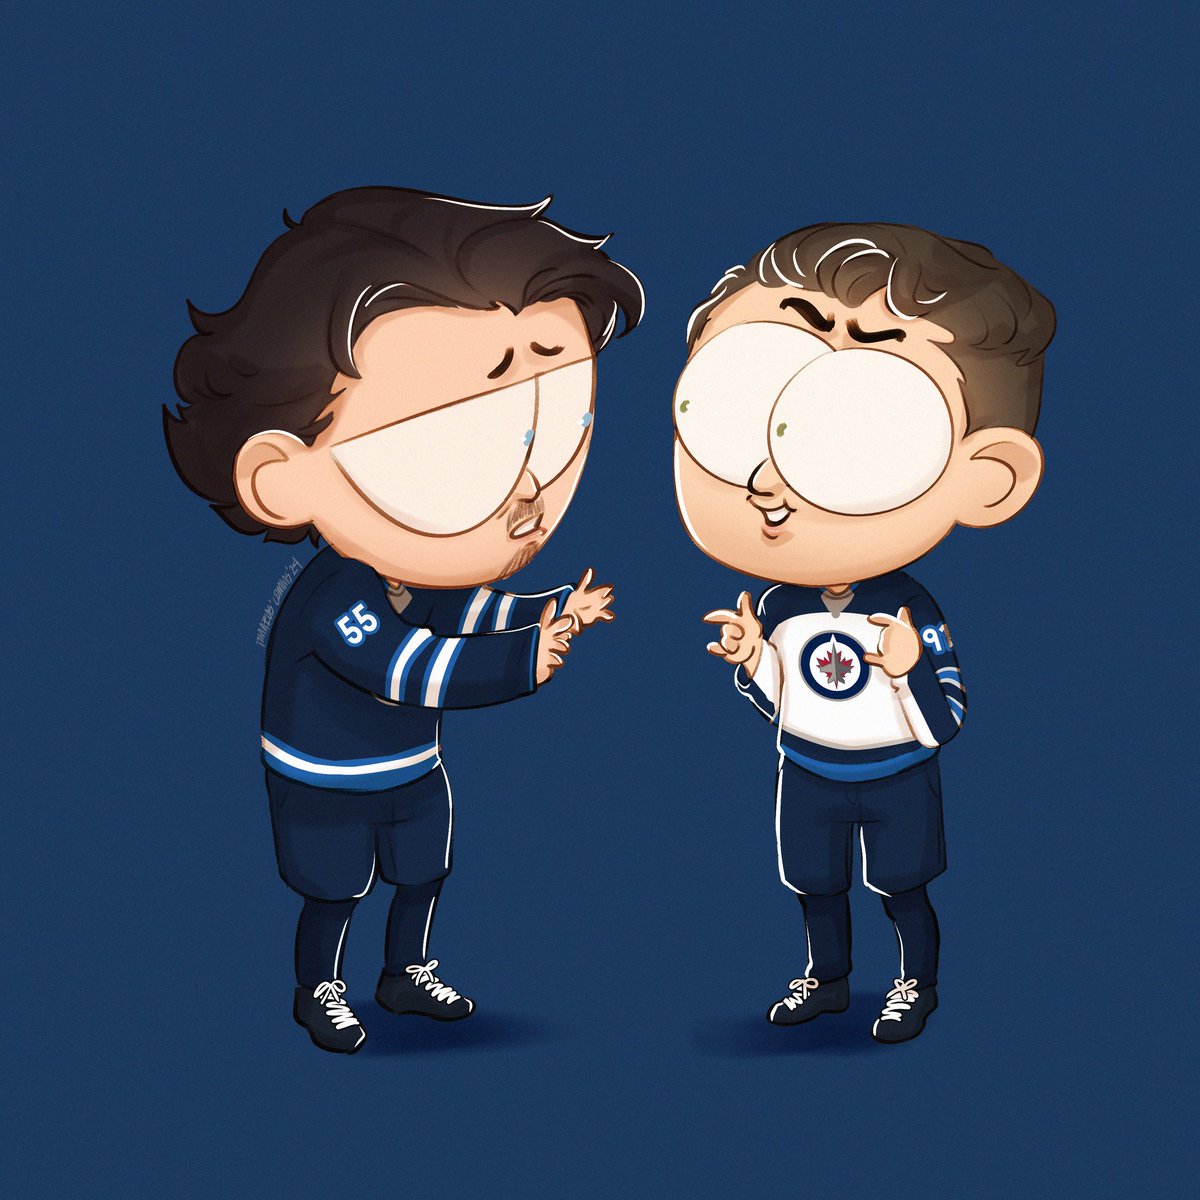 Com art from @artimaaaeus of #markscheifele and #coleperfetti the joke is Mark NEVER swears and Cole swore on a live interview last week (by accident) so Mark is trying to teach Cole to not swear. Love this much so adorable #Winnipegjets #gojetsgo #fuledbypassion